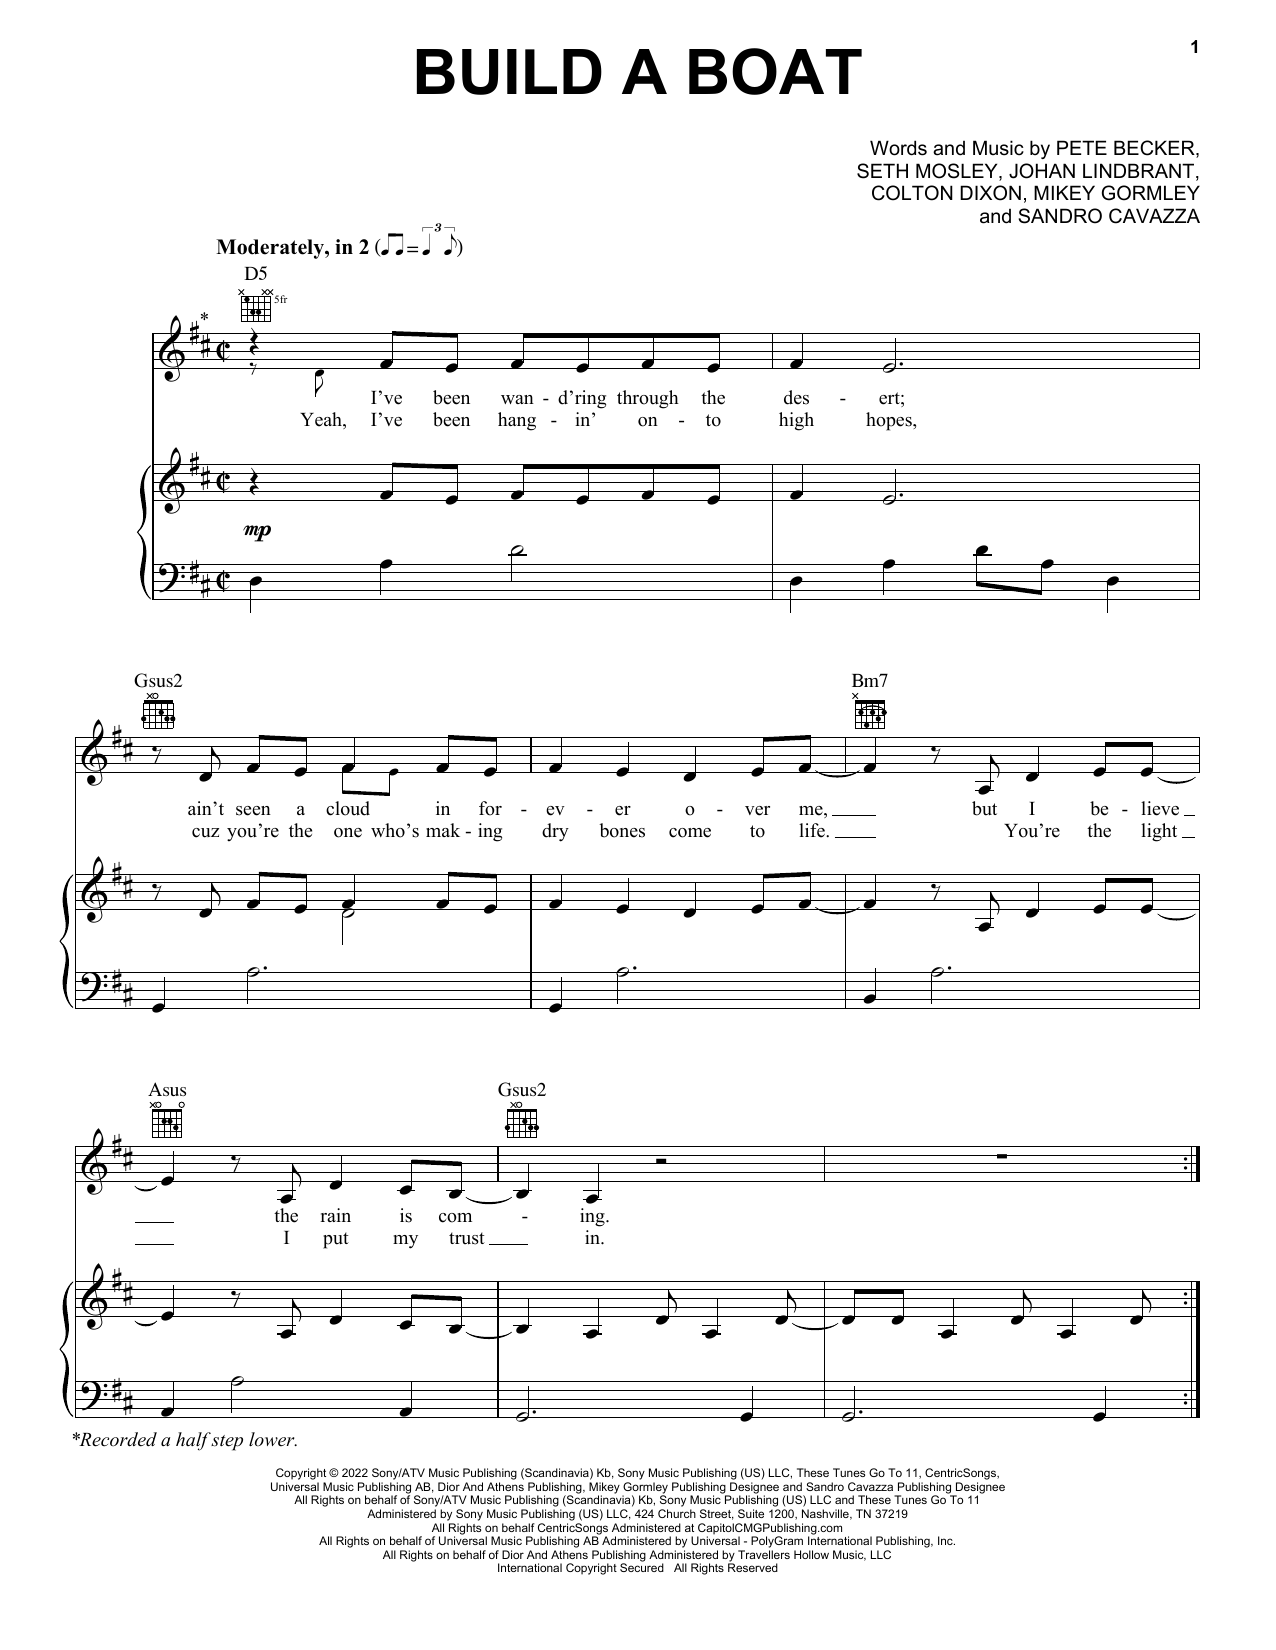 Colton Dixon Build A Boat sheet music notes and chords. Download Printable PDF.